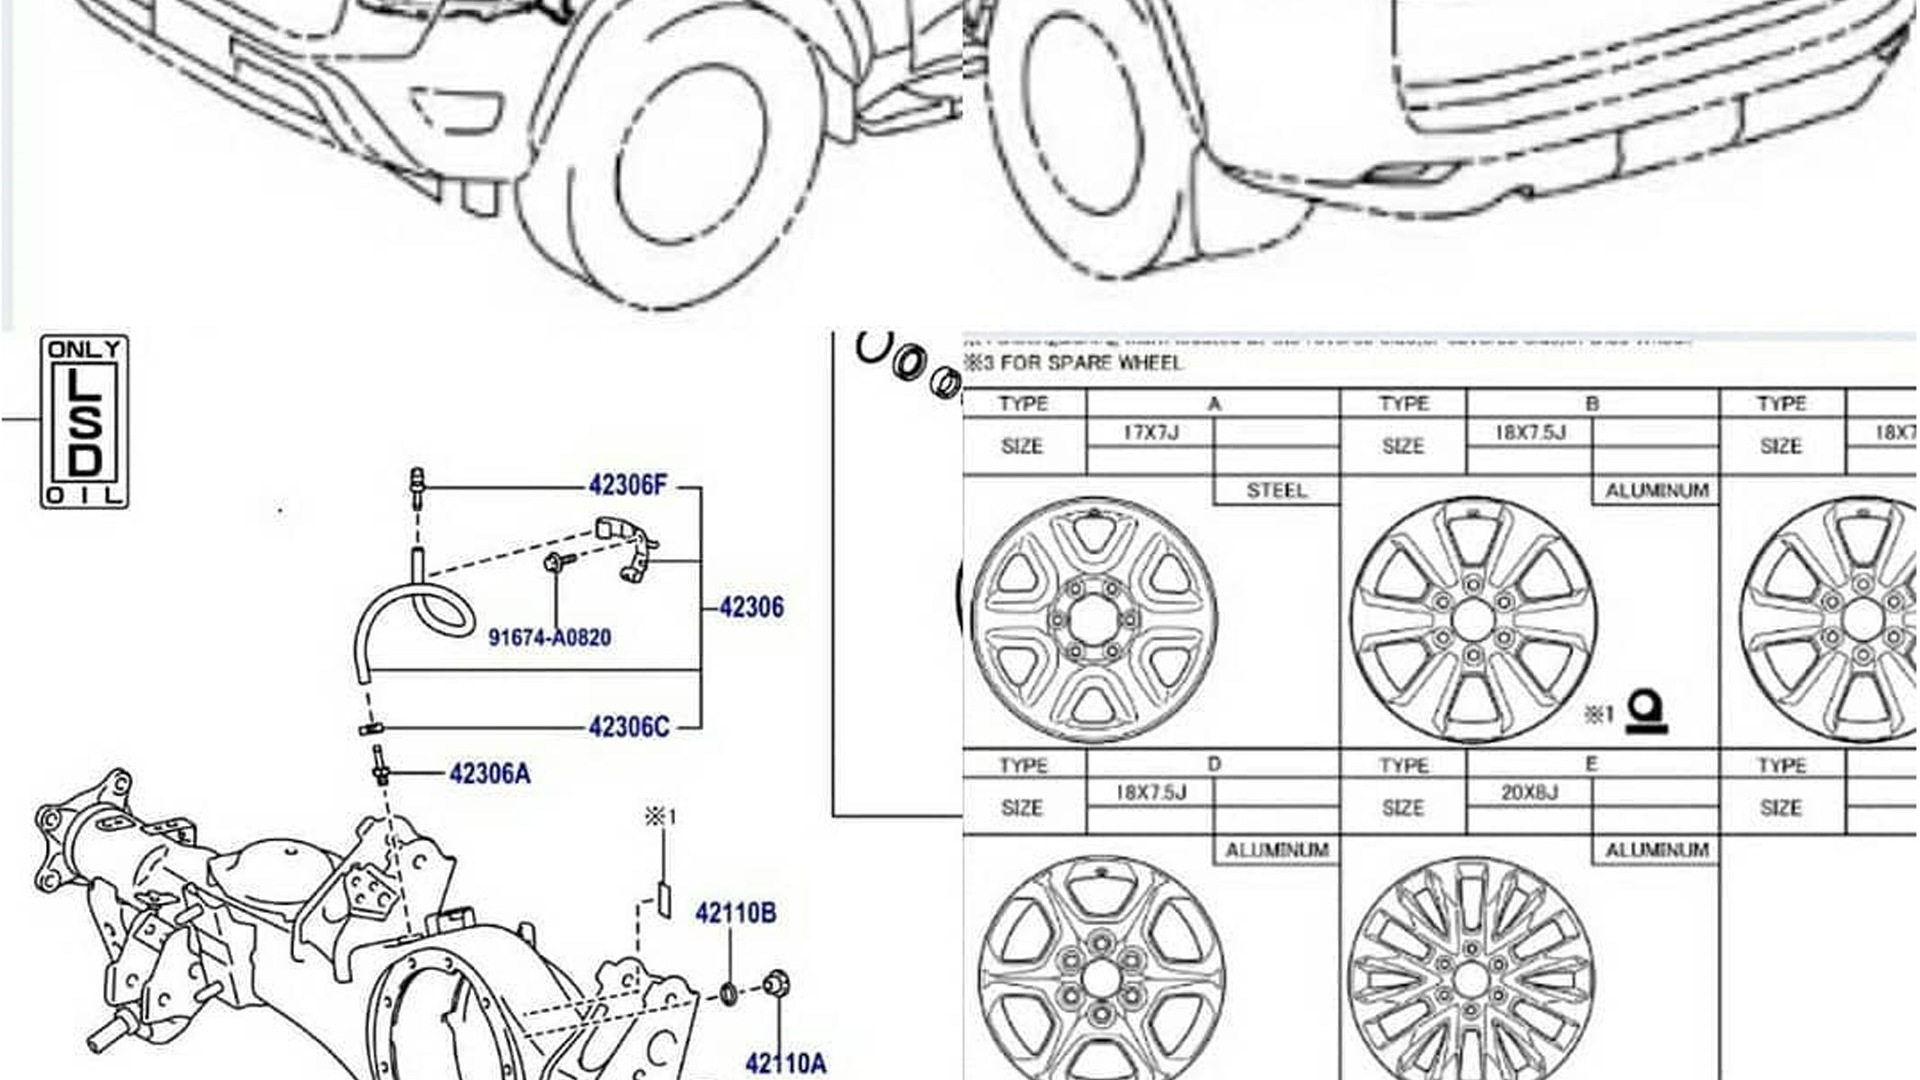 Alleged technical drawing for 2022 Toyota Land Cruiser (300 series) - Photo credit: Prado-Club